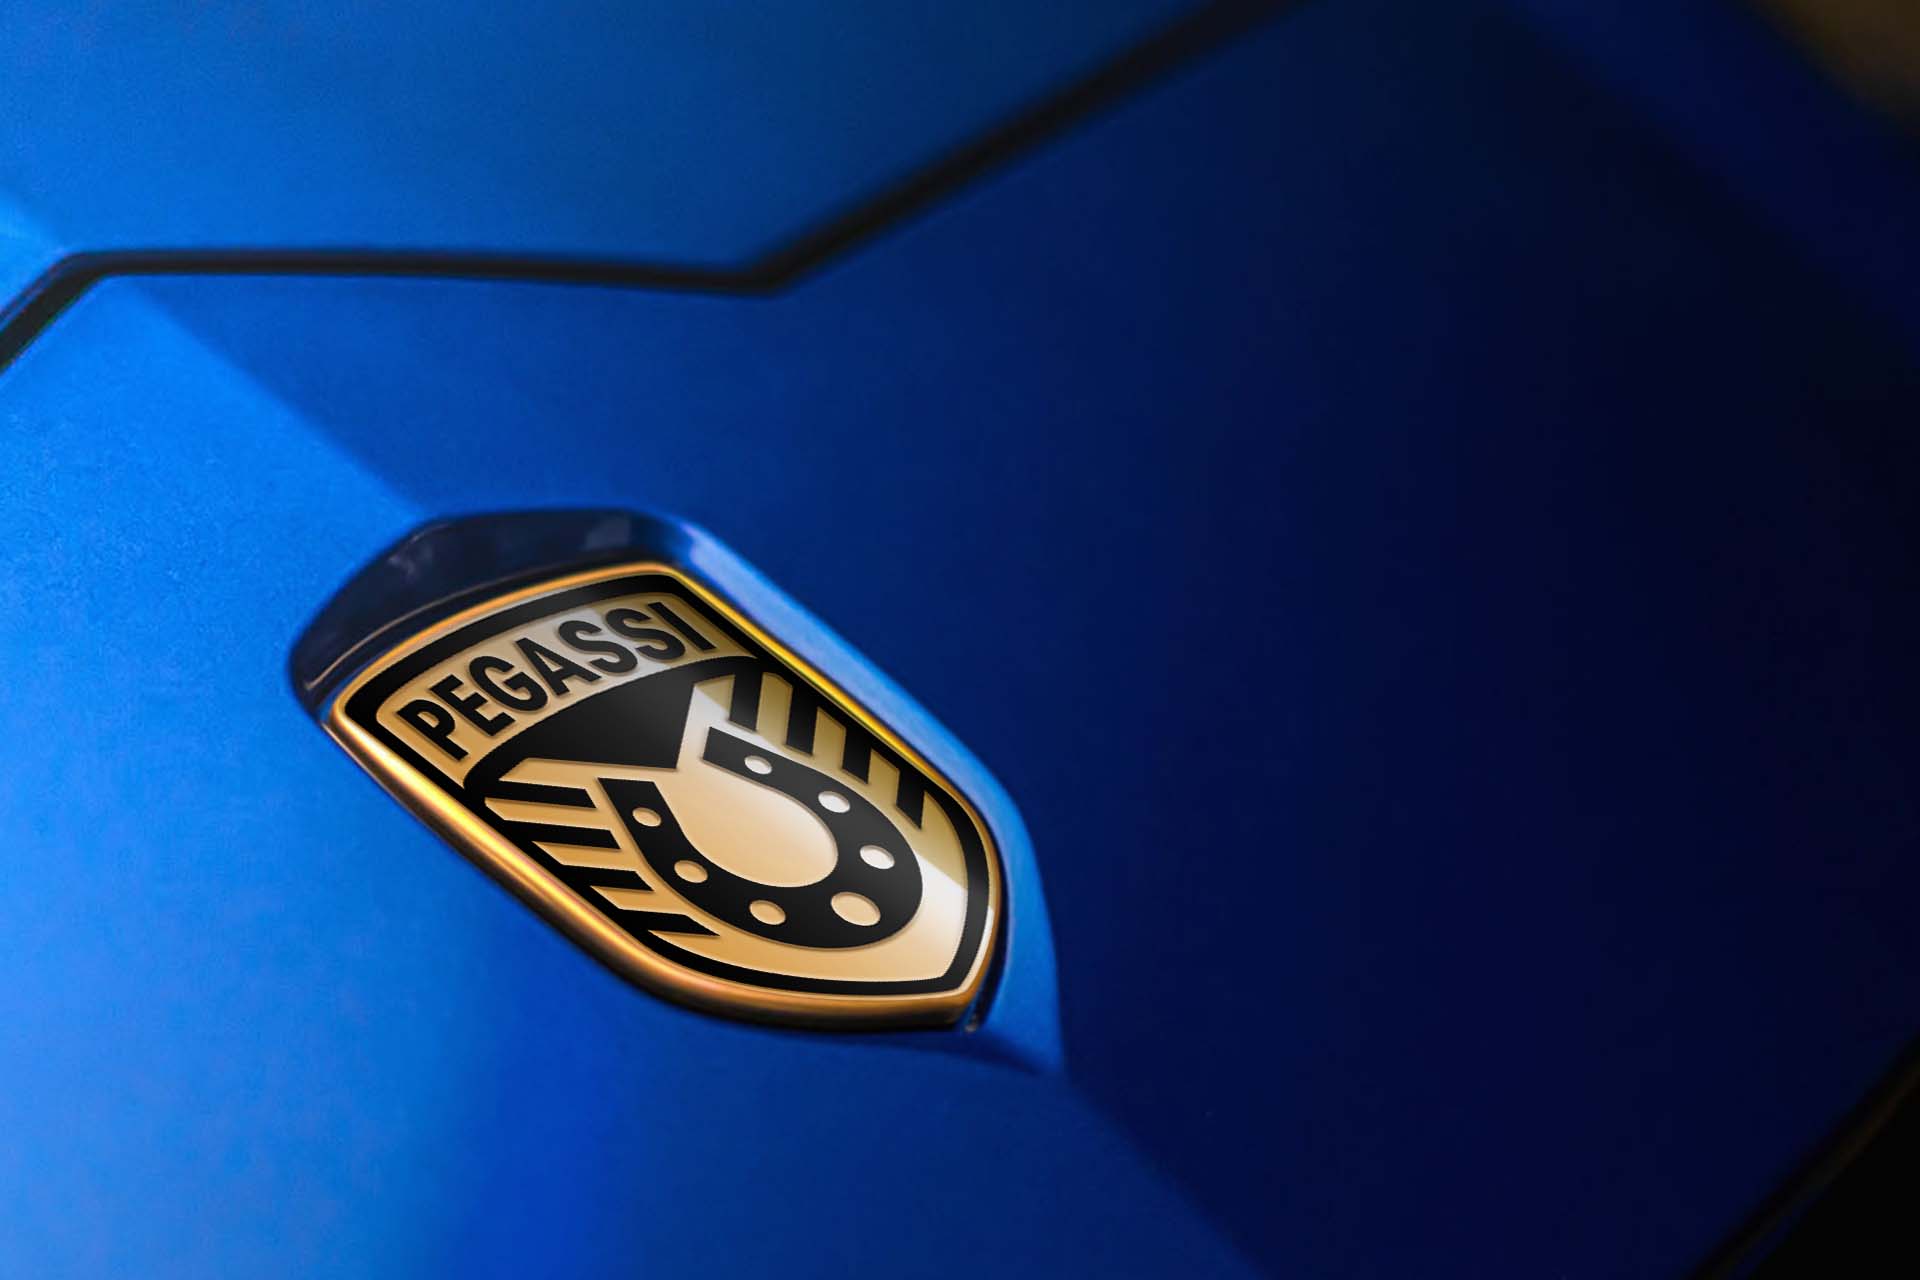 Pegassi badge on a blue supercar in real life.